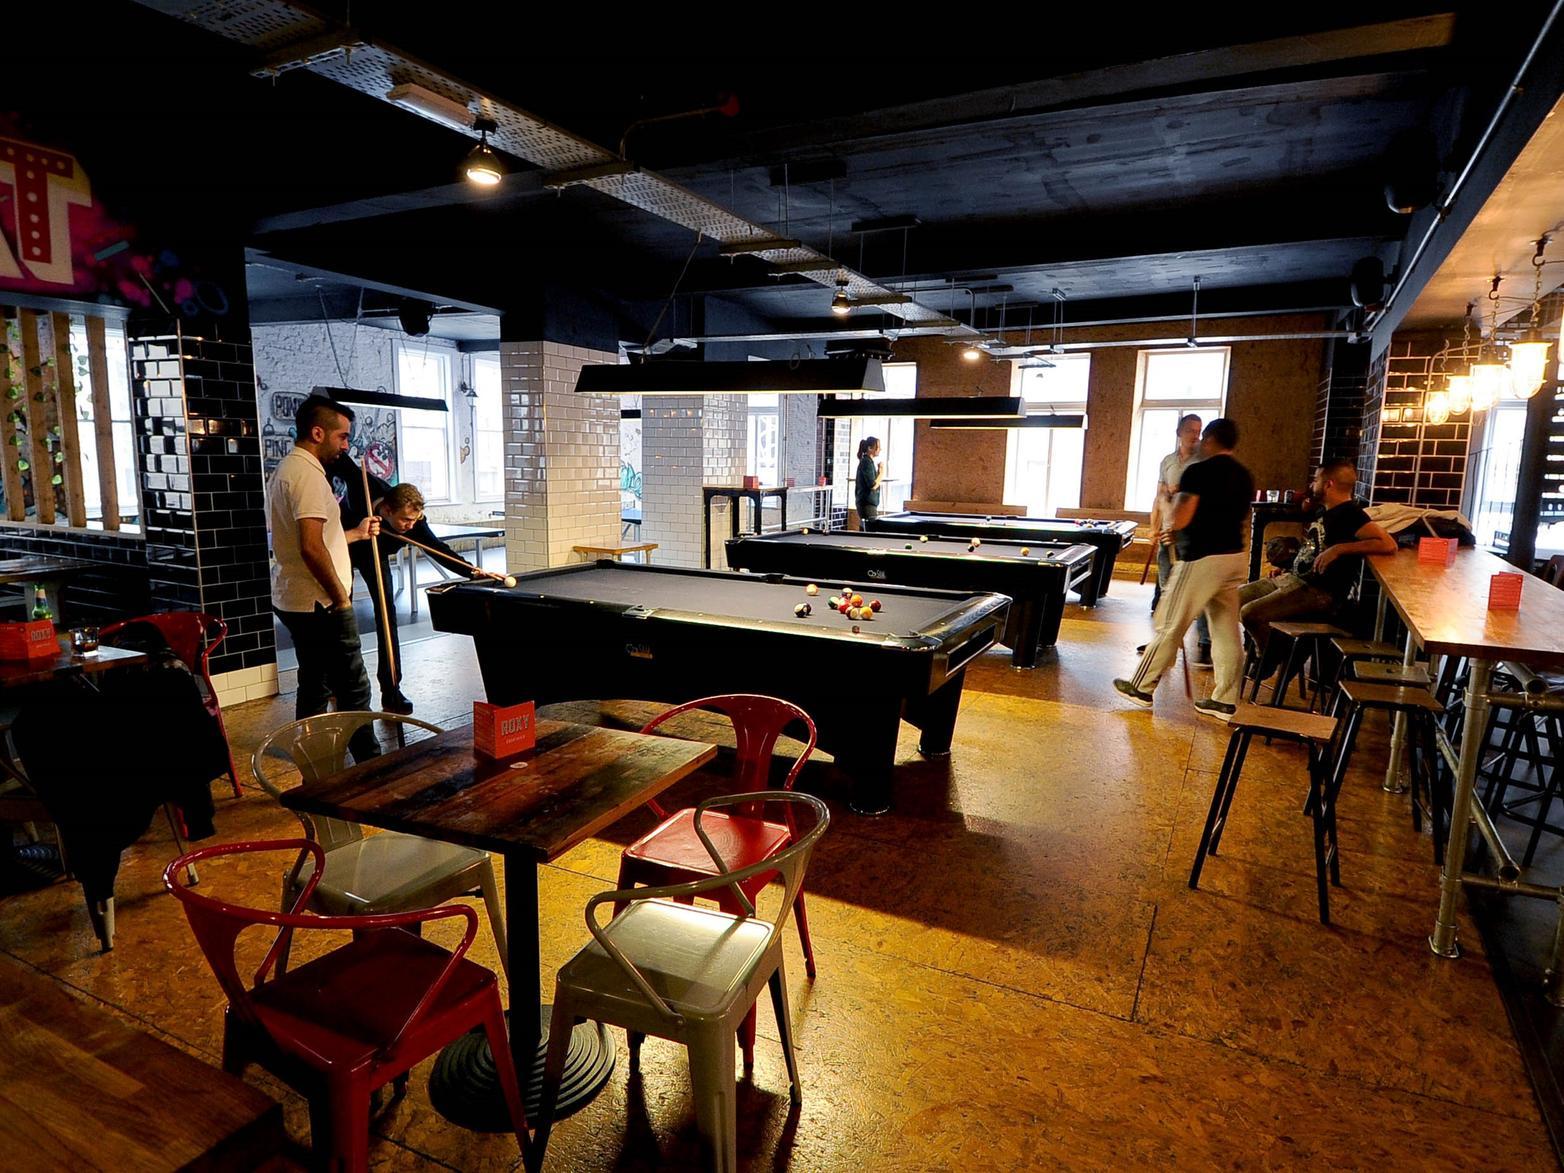 Unleash your competitive side and challenge your friends to a game of pool, ping pong or mini golf at Roxy Ball Room and enjoy some fun-filled time together, with prices starting at 6.00 GBP each.